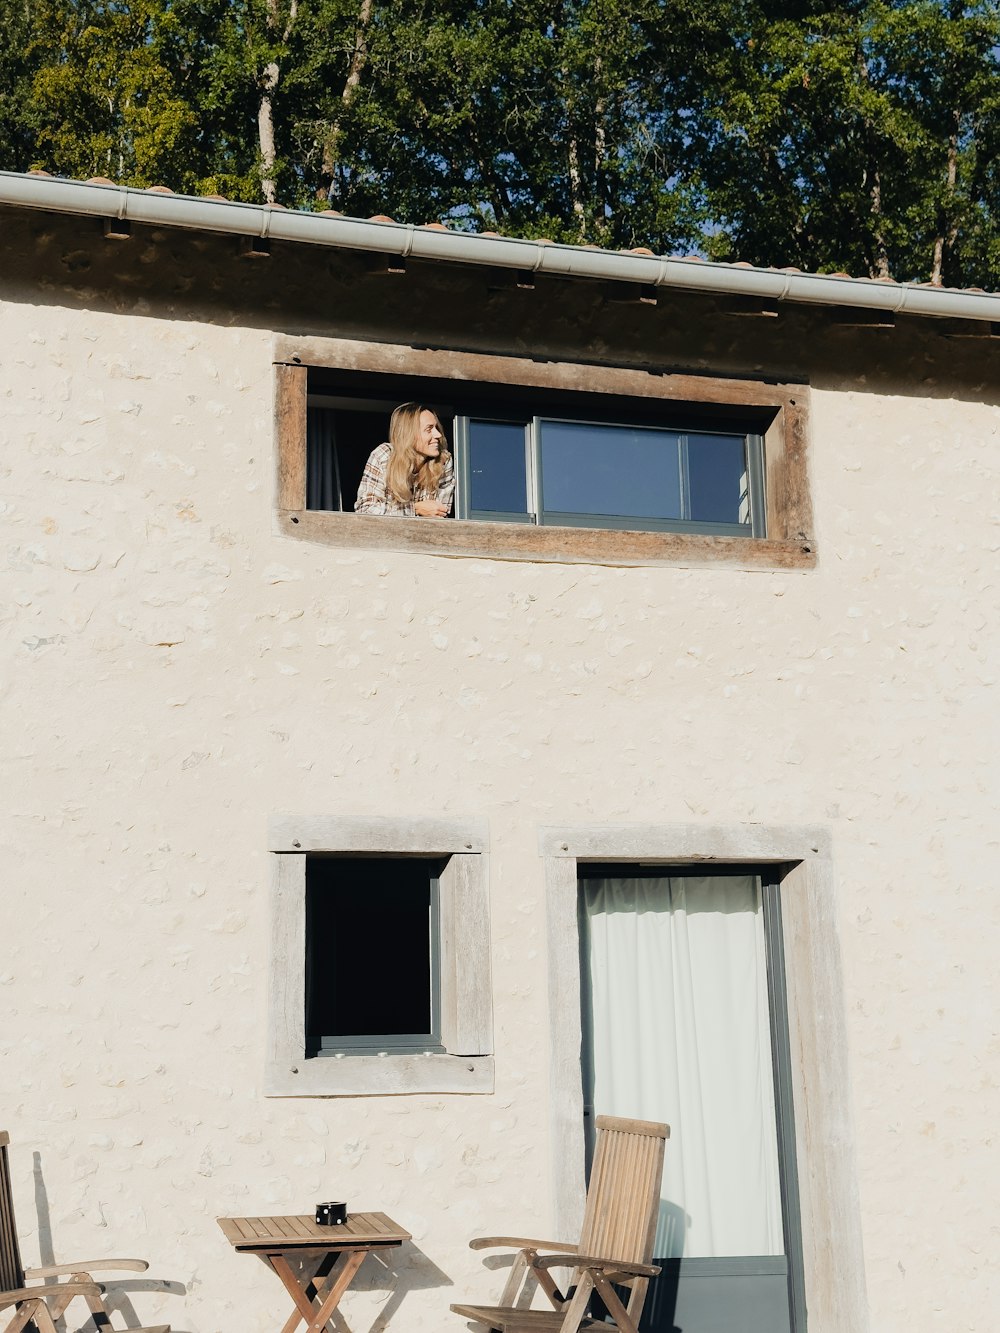 a dog is looking out of a window